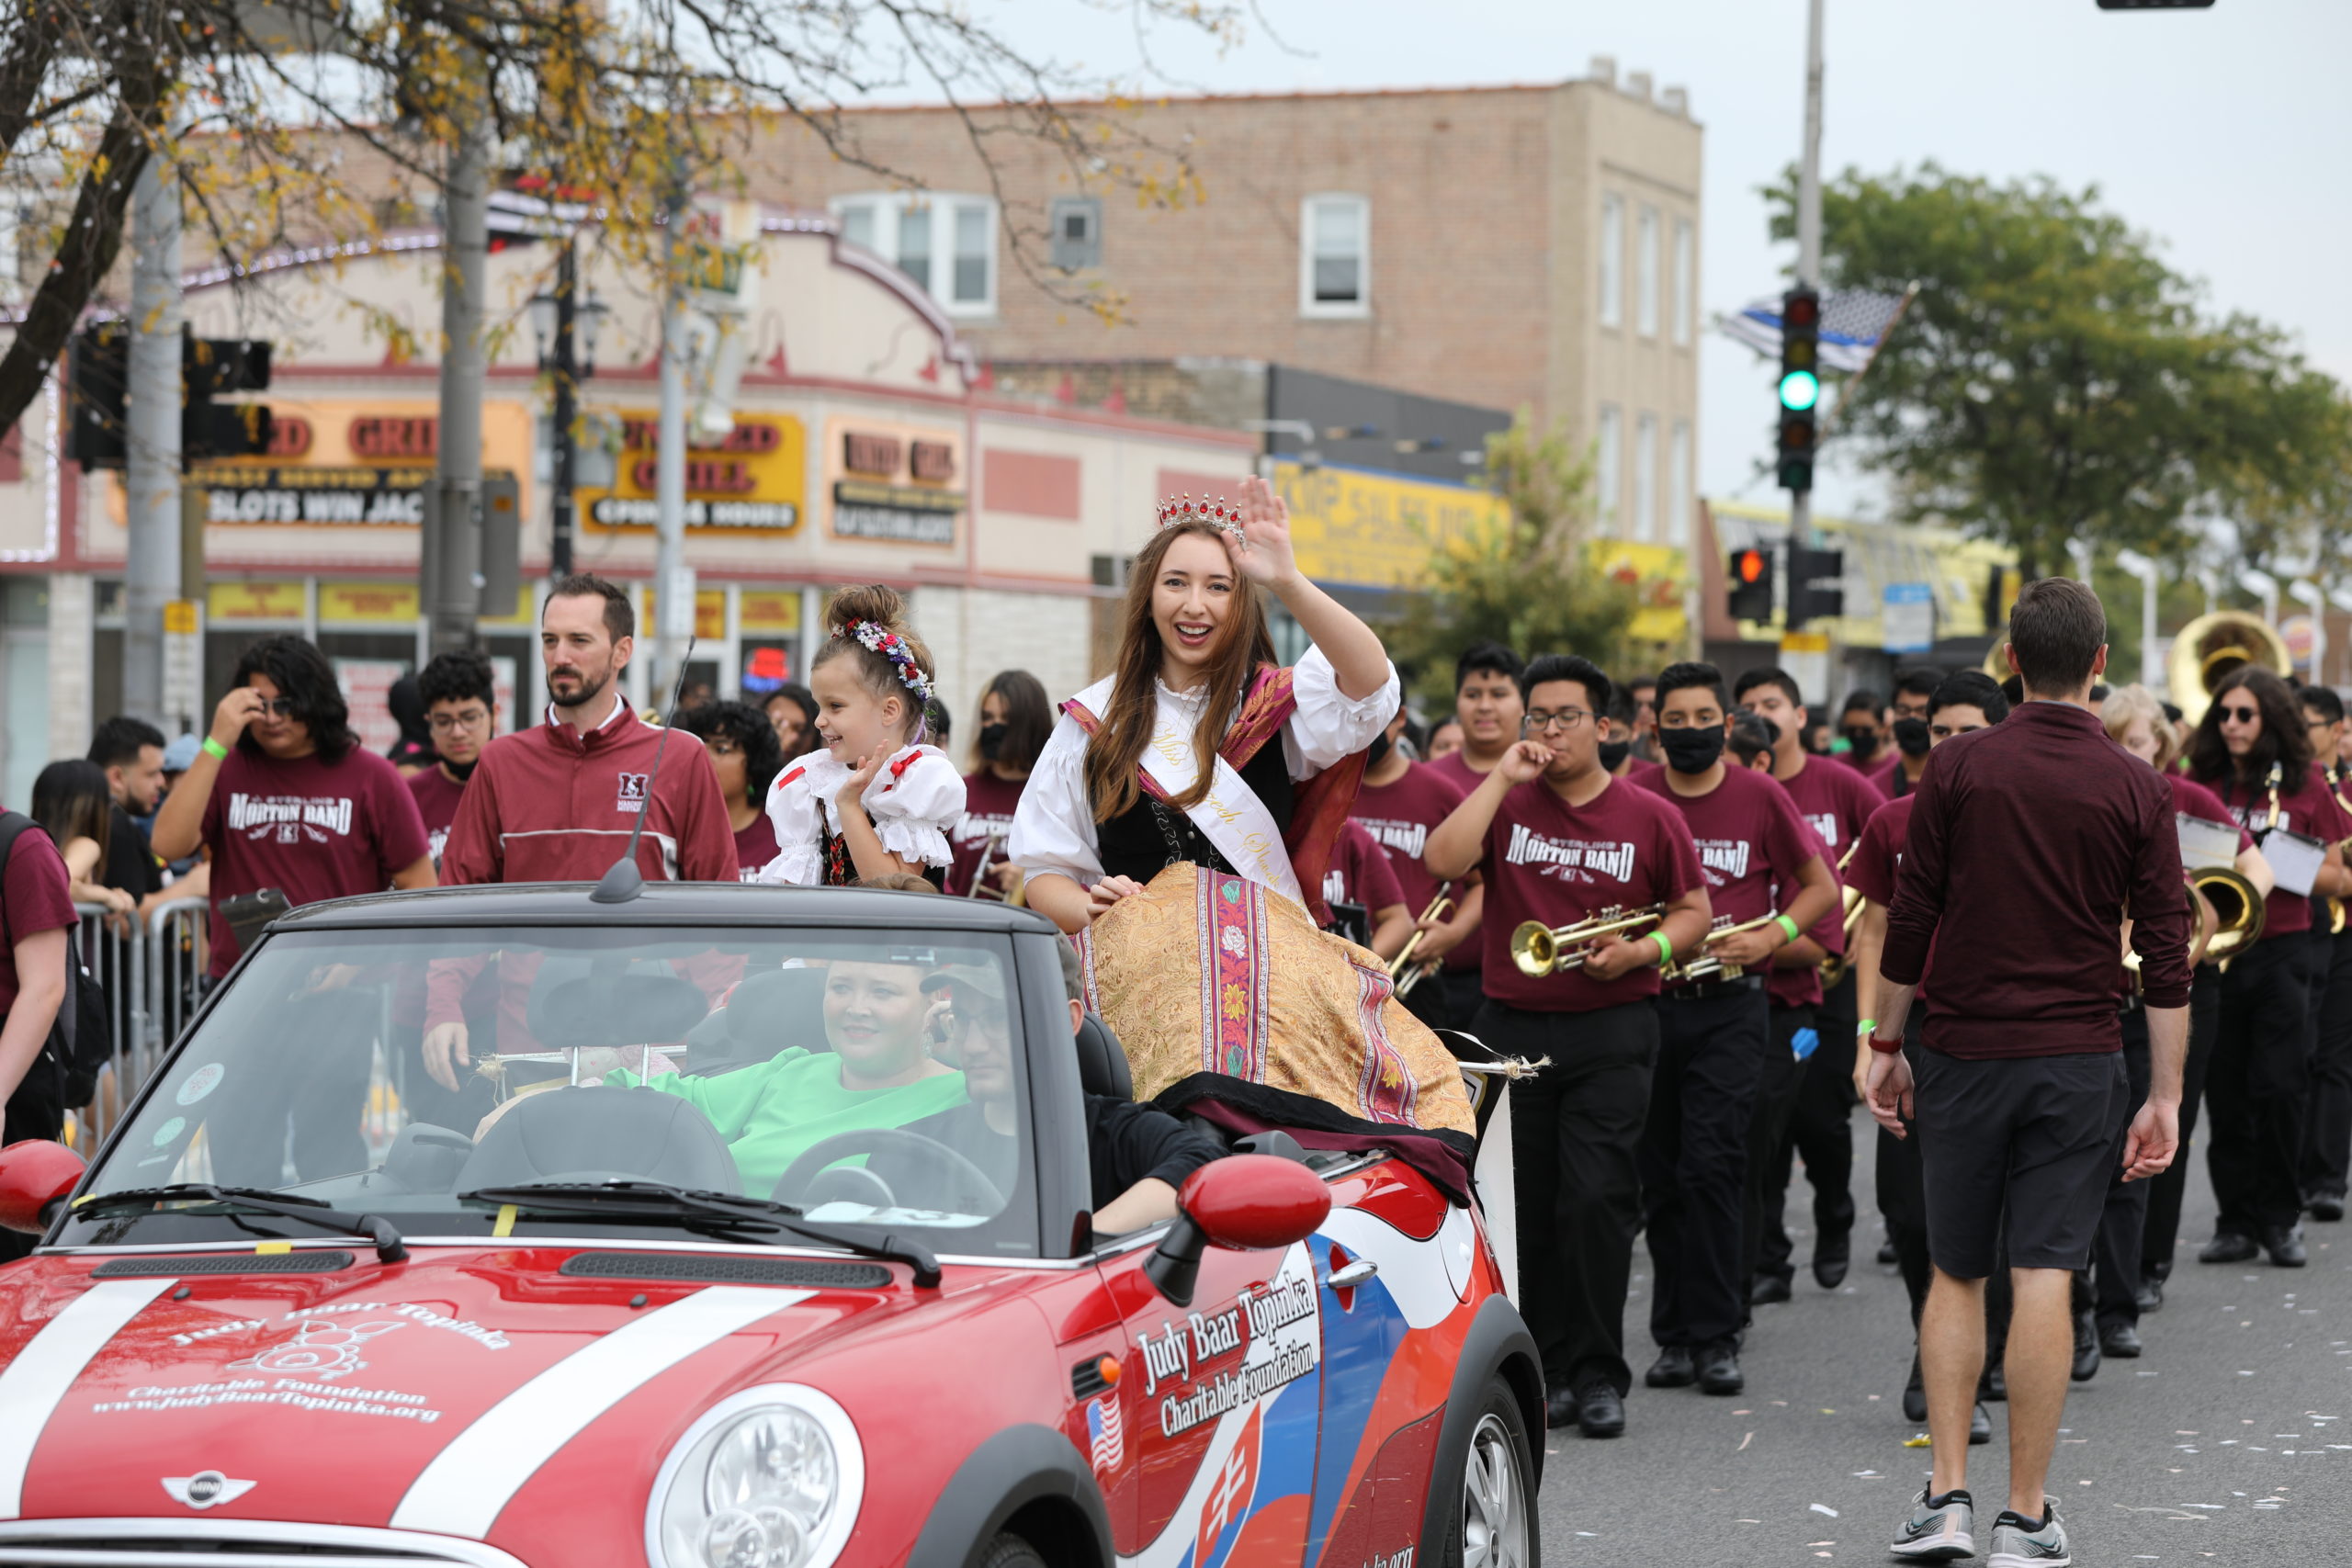 Students from many of the regional schools including Morton High School, and others participated in the 53rd Annual Houby Parade Sunday Oct. 10, 2021